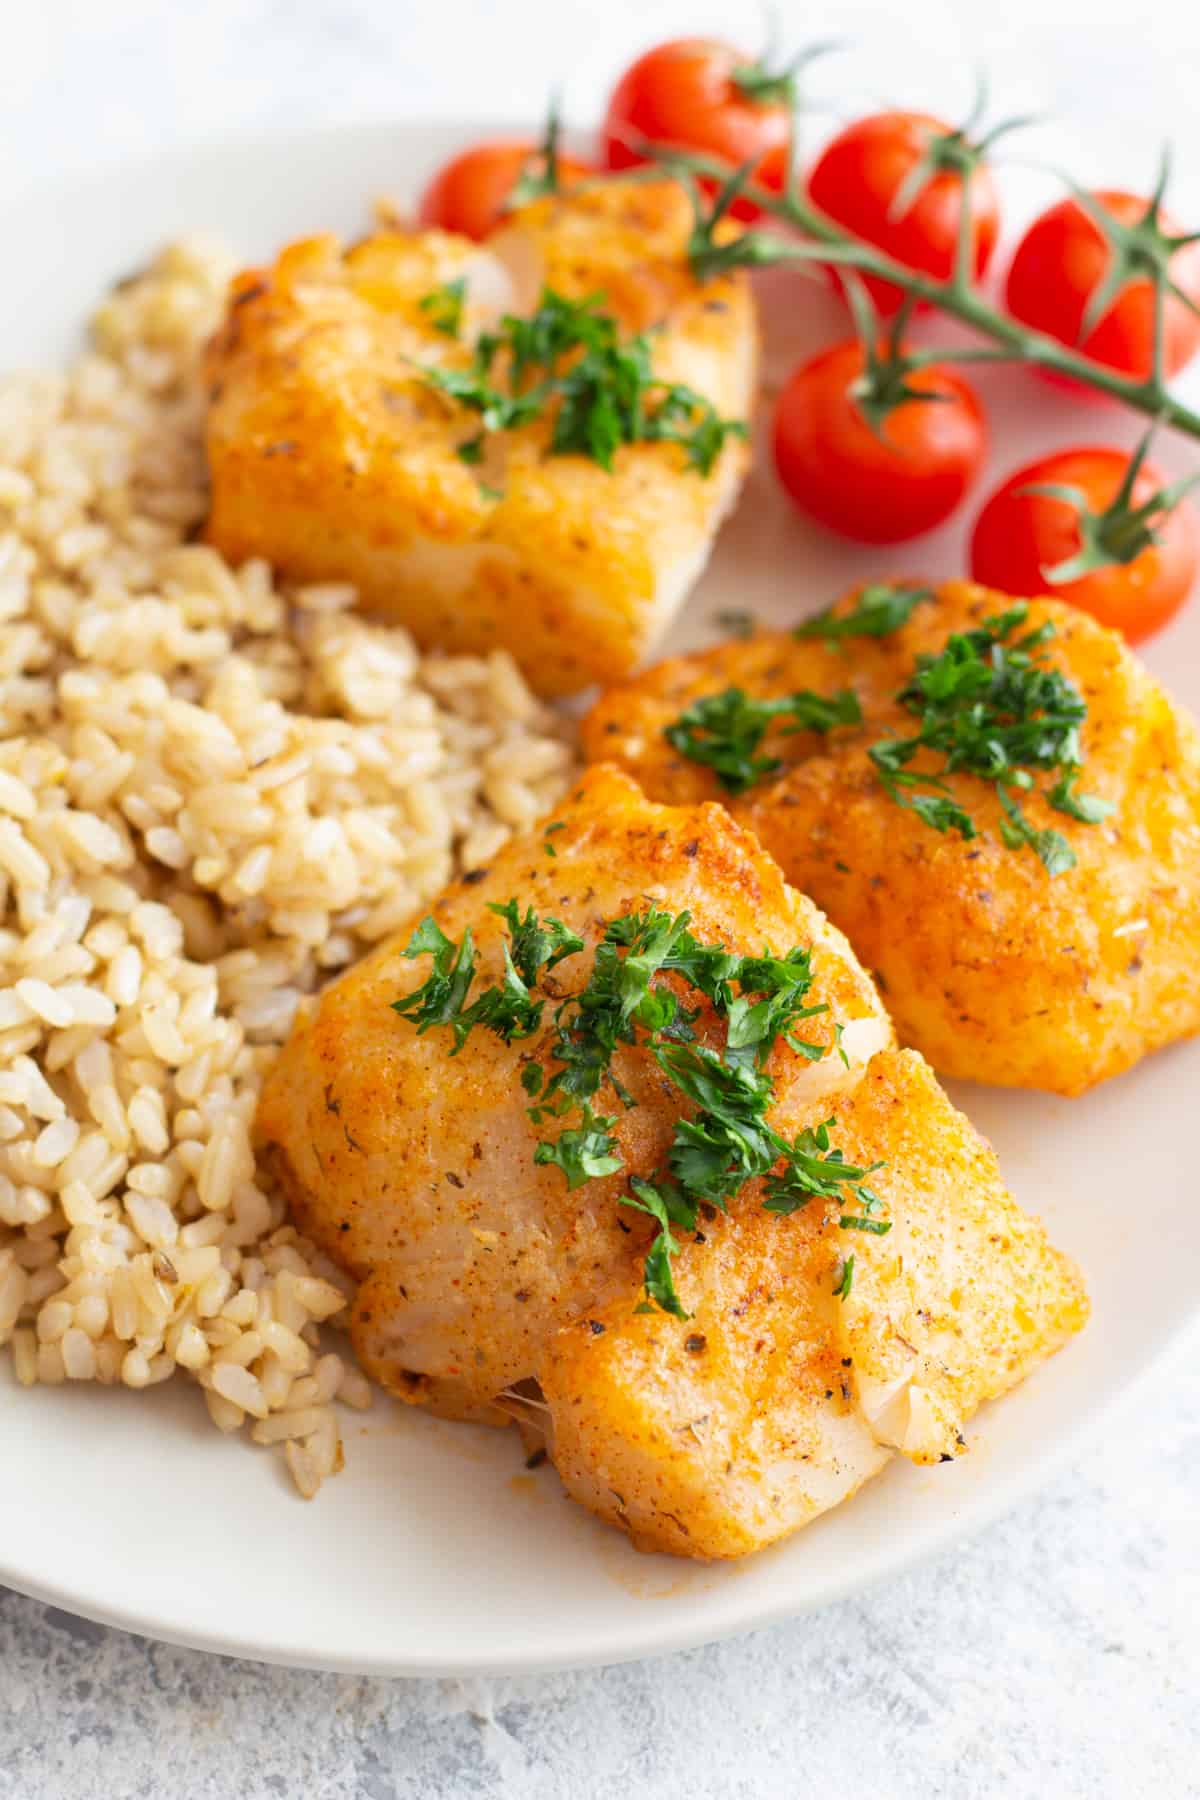 Parmesan baked cod is simple and easy to make. Tender cod fillets are coated with a parmesan and spice combination and baked to perfection. You can serve this dish with different side dishes such as brown rice or a simple salad. 
